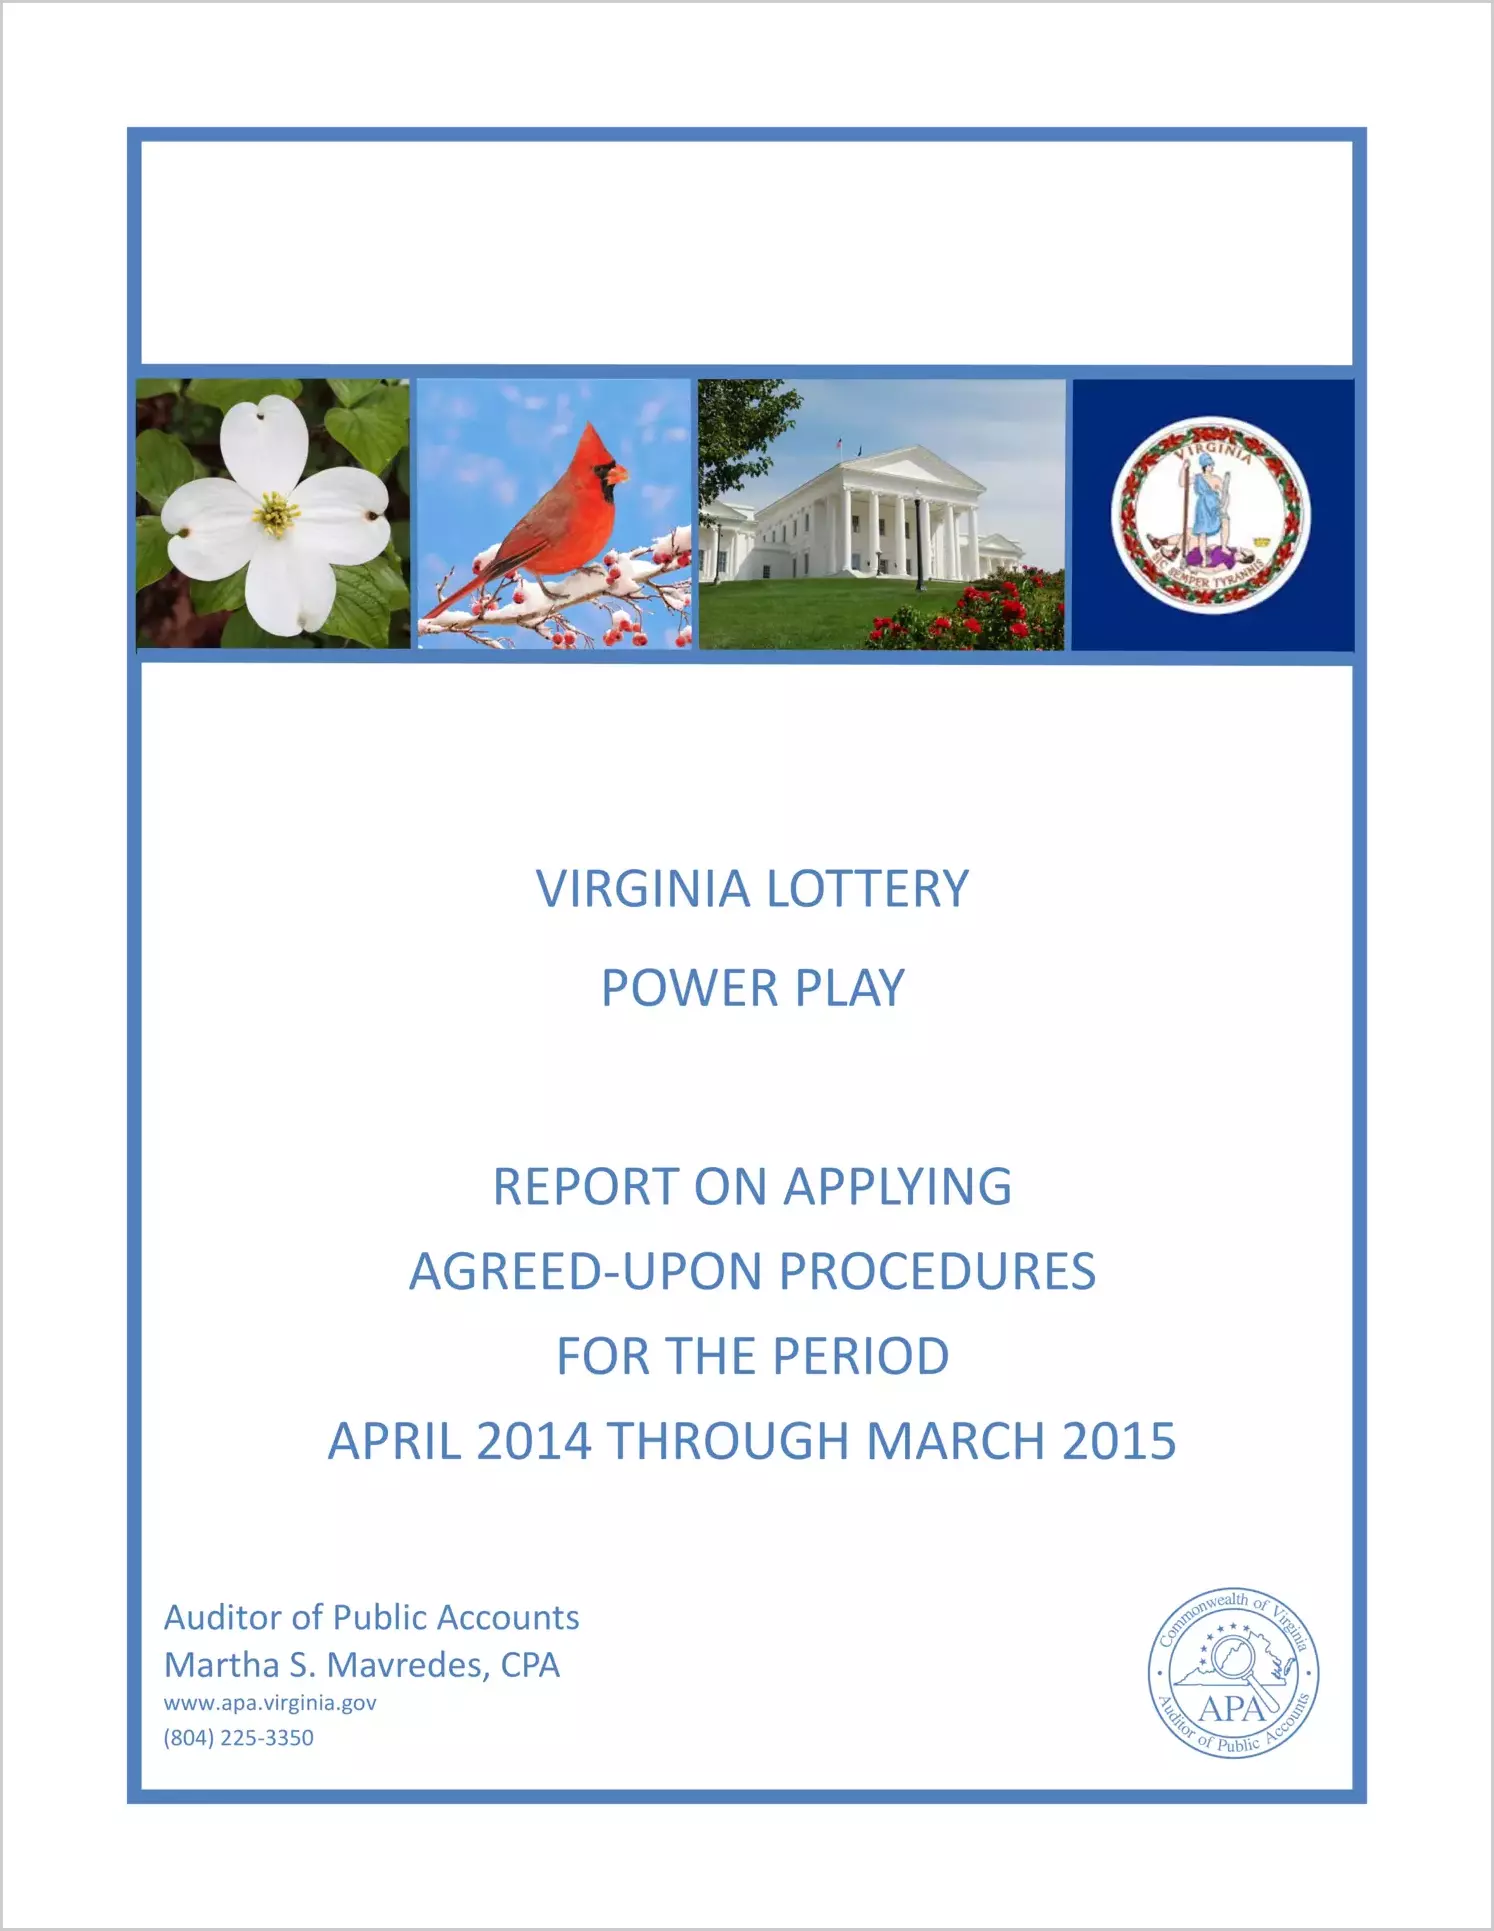 VA Lottery Power Play report on Applying Agreed-Upon Procedures for the period April, 2014 through March, 2015